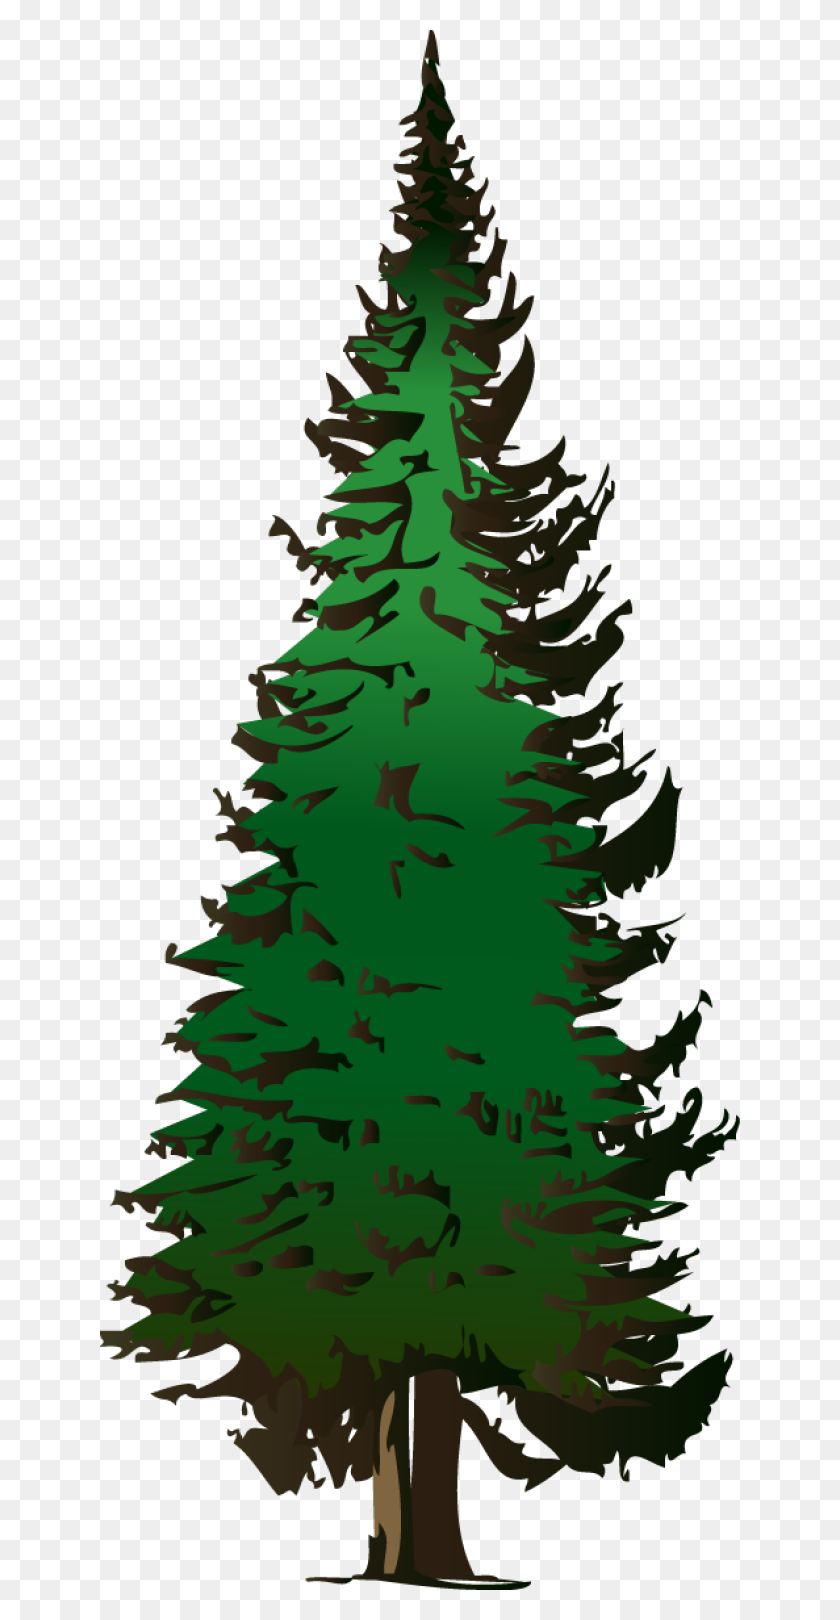 640x1560 Evergreen Clipart Look At Evergreen Clip Art Images - Evergreen Tree Clipart Black And White